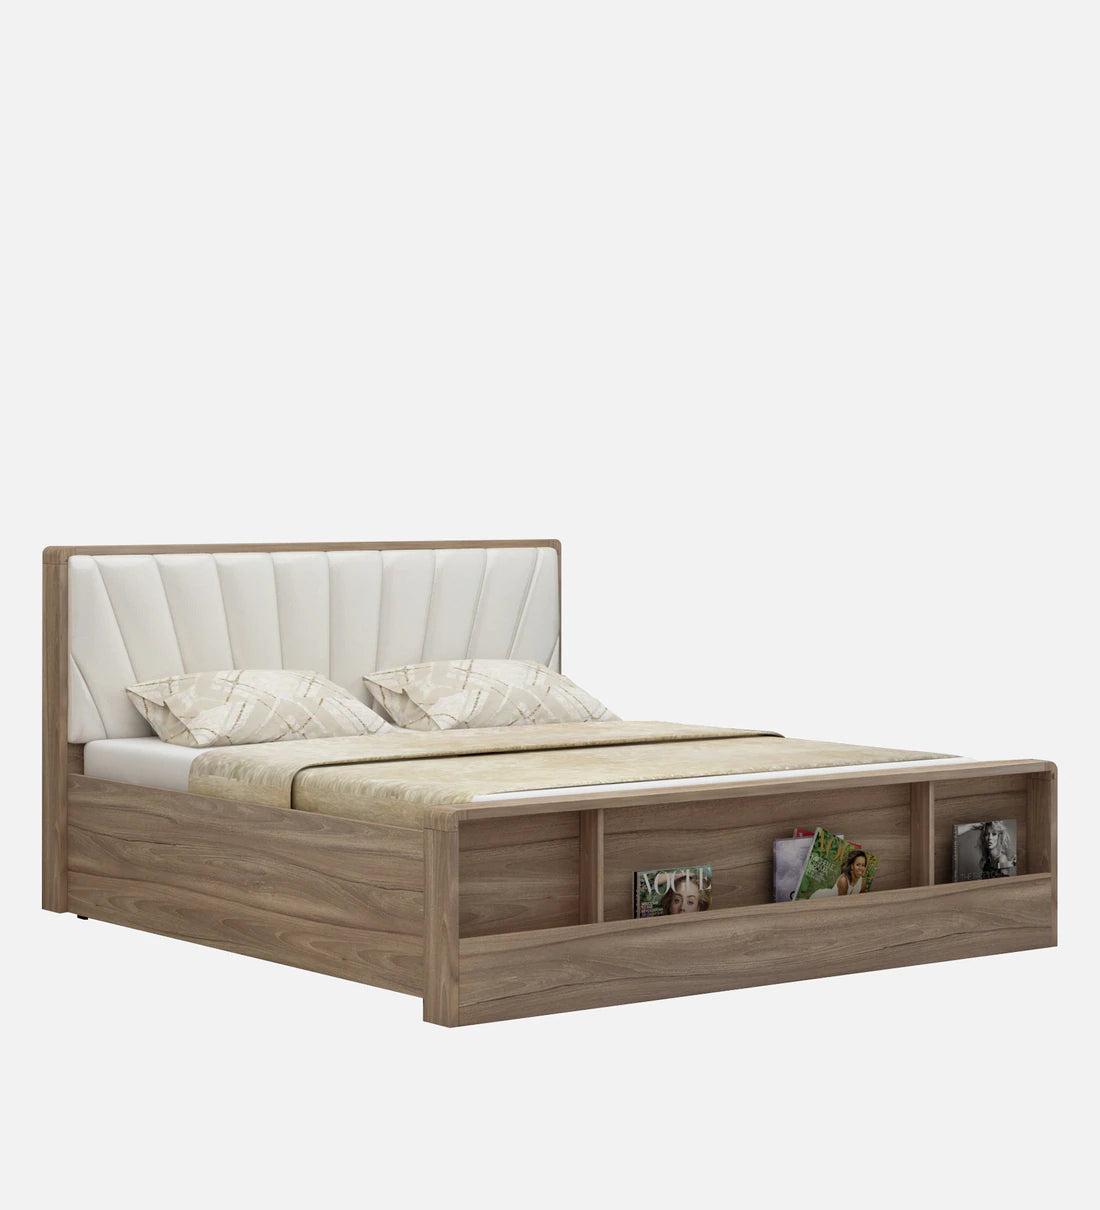 Symo King Size Bed in Bella Noce & Glossy White Colour with Hydraulic Storage